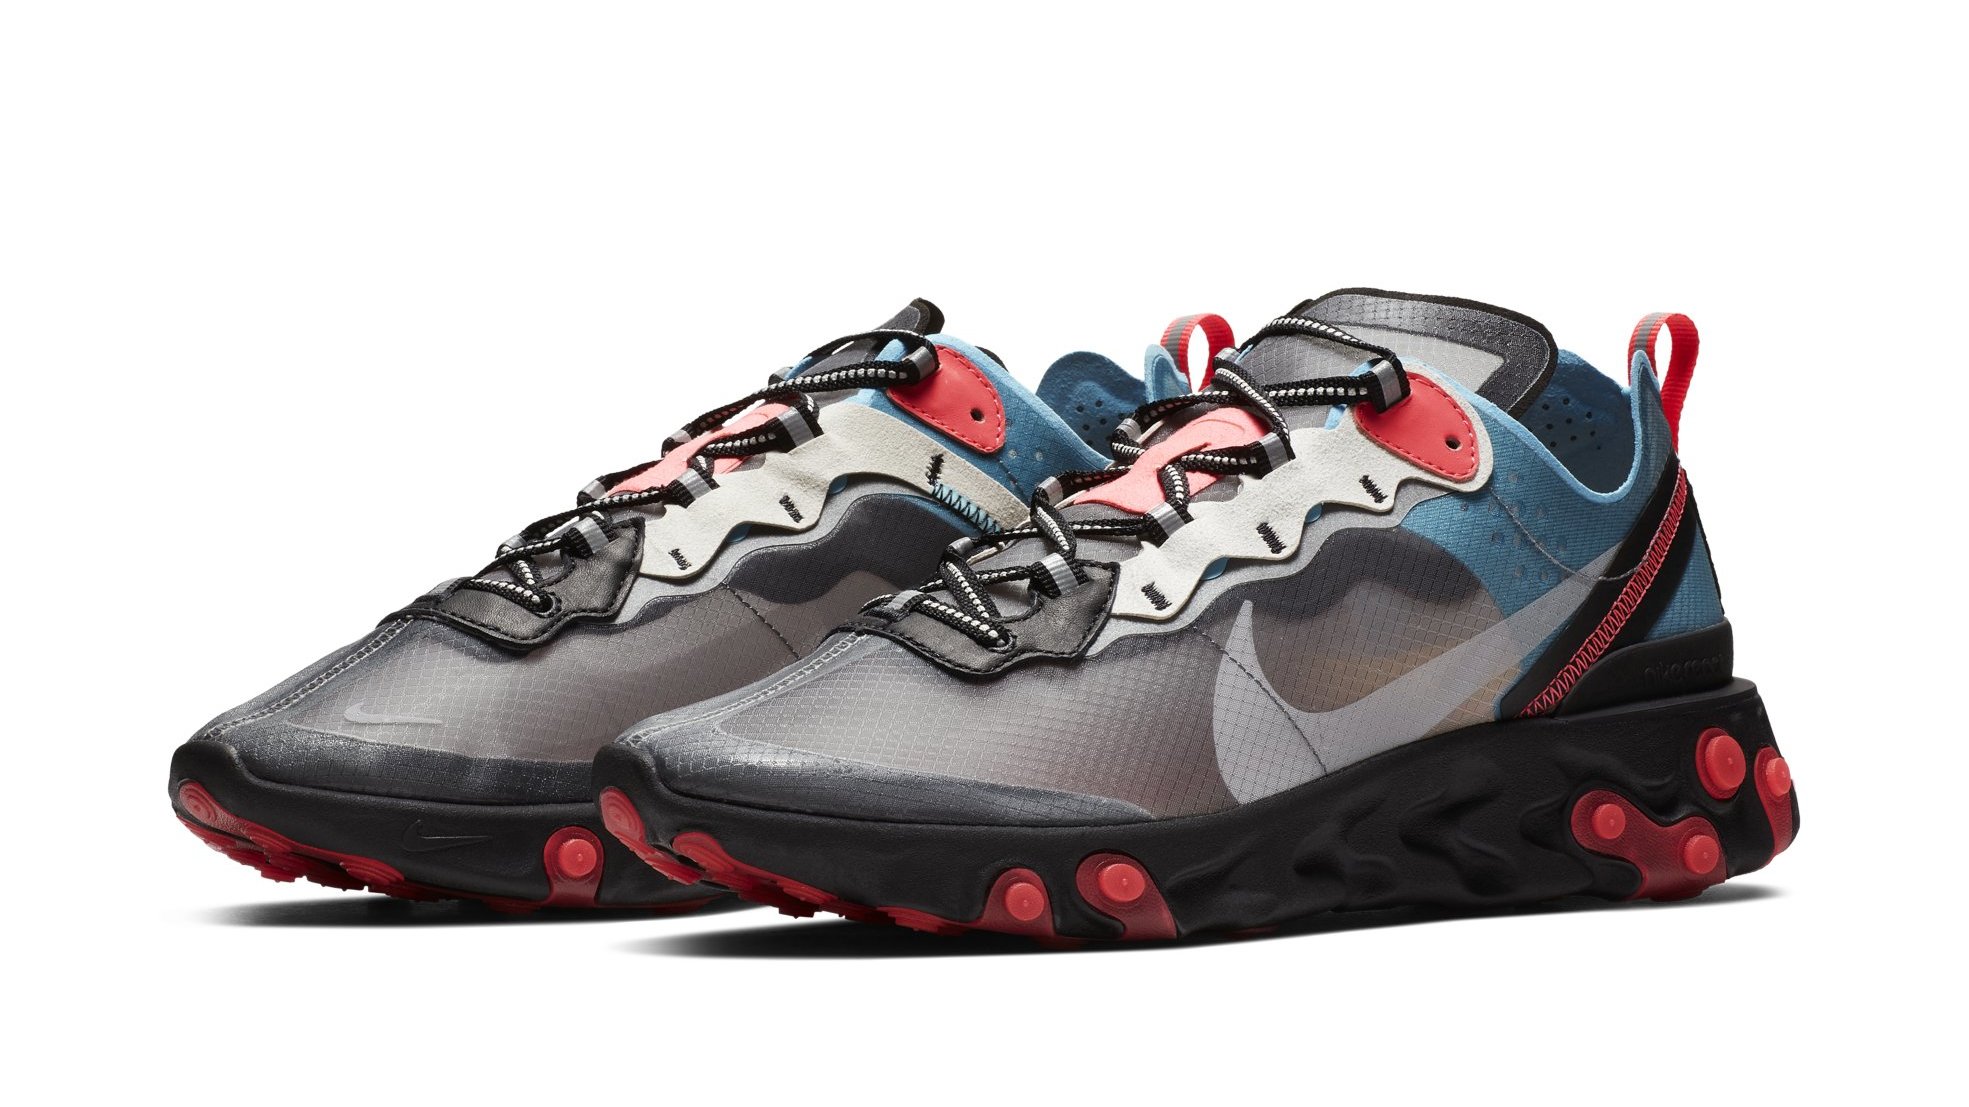 Nike React Element 87 'Black/Cool Grey/Blue Chill/Solar Red' AQ1090-006​​​​​​​ Release | Sole Collector